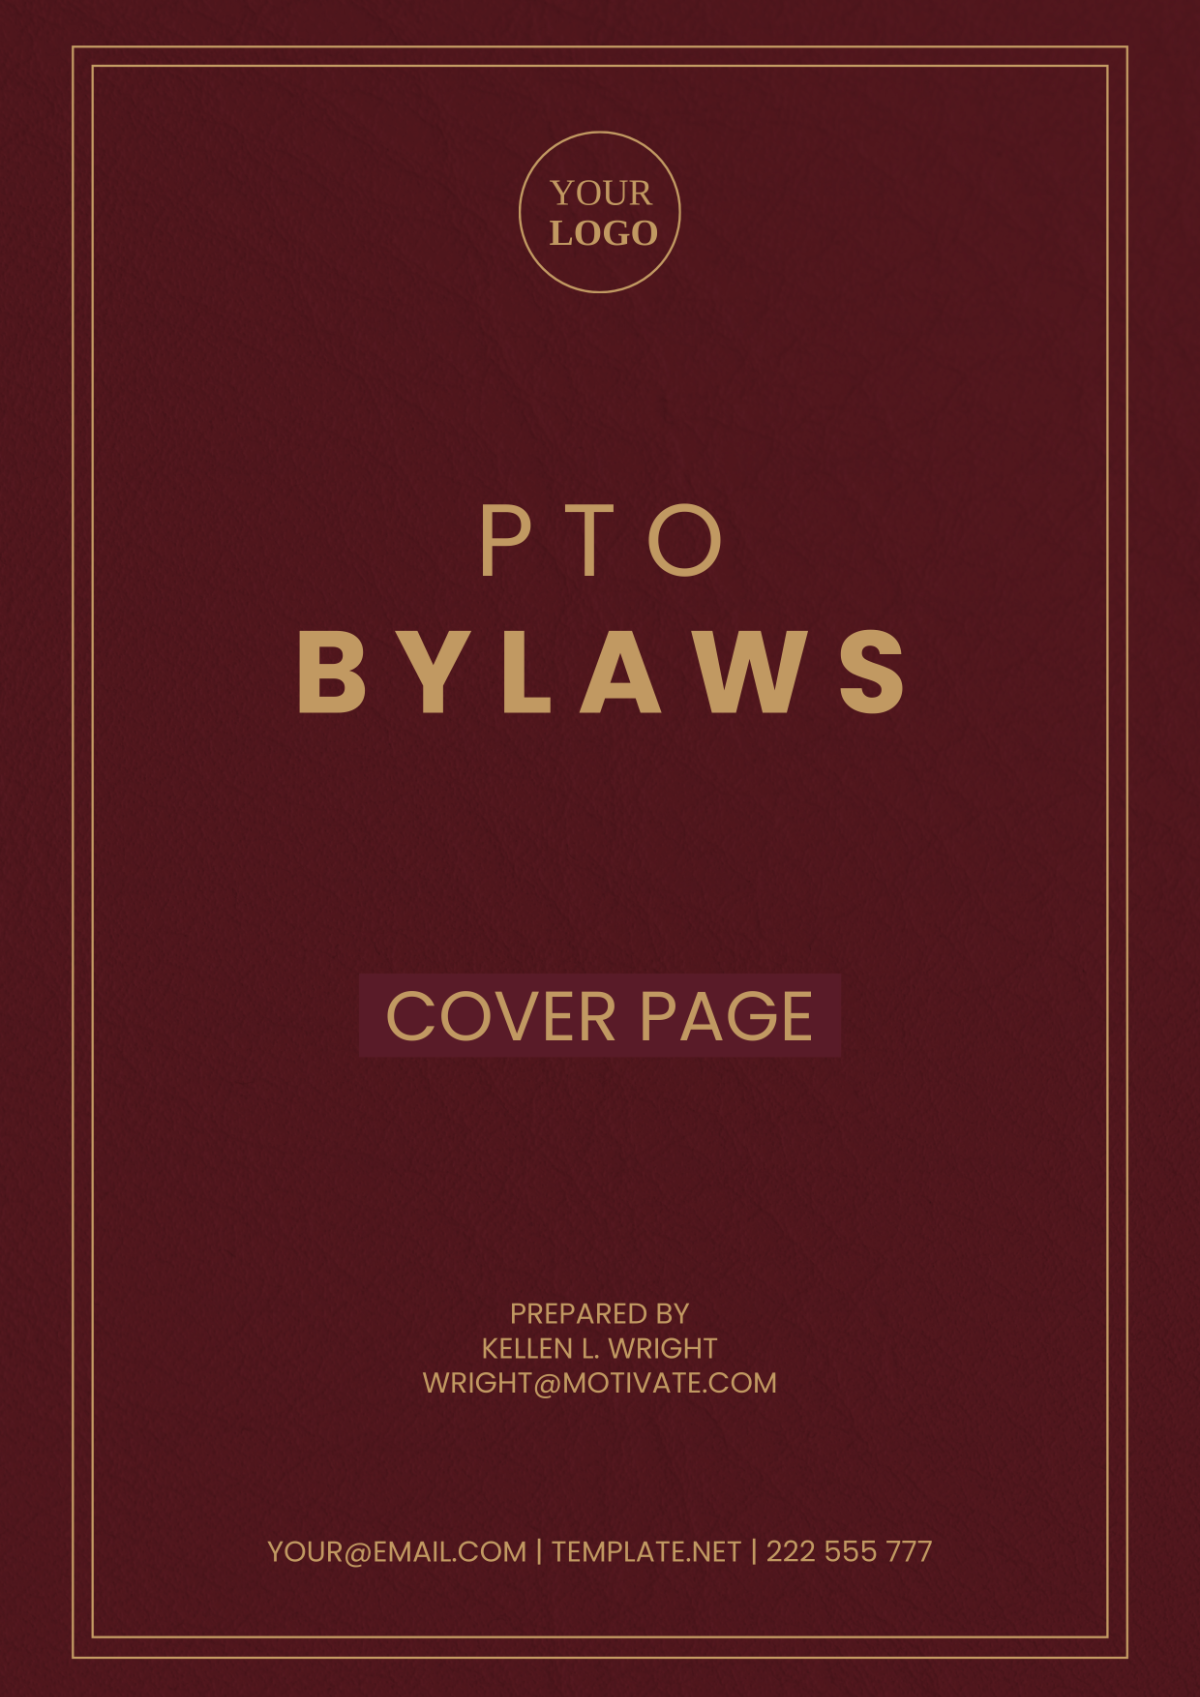 PTO Bylaws Cover Page Template